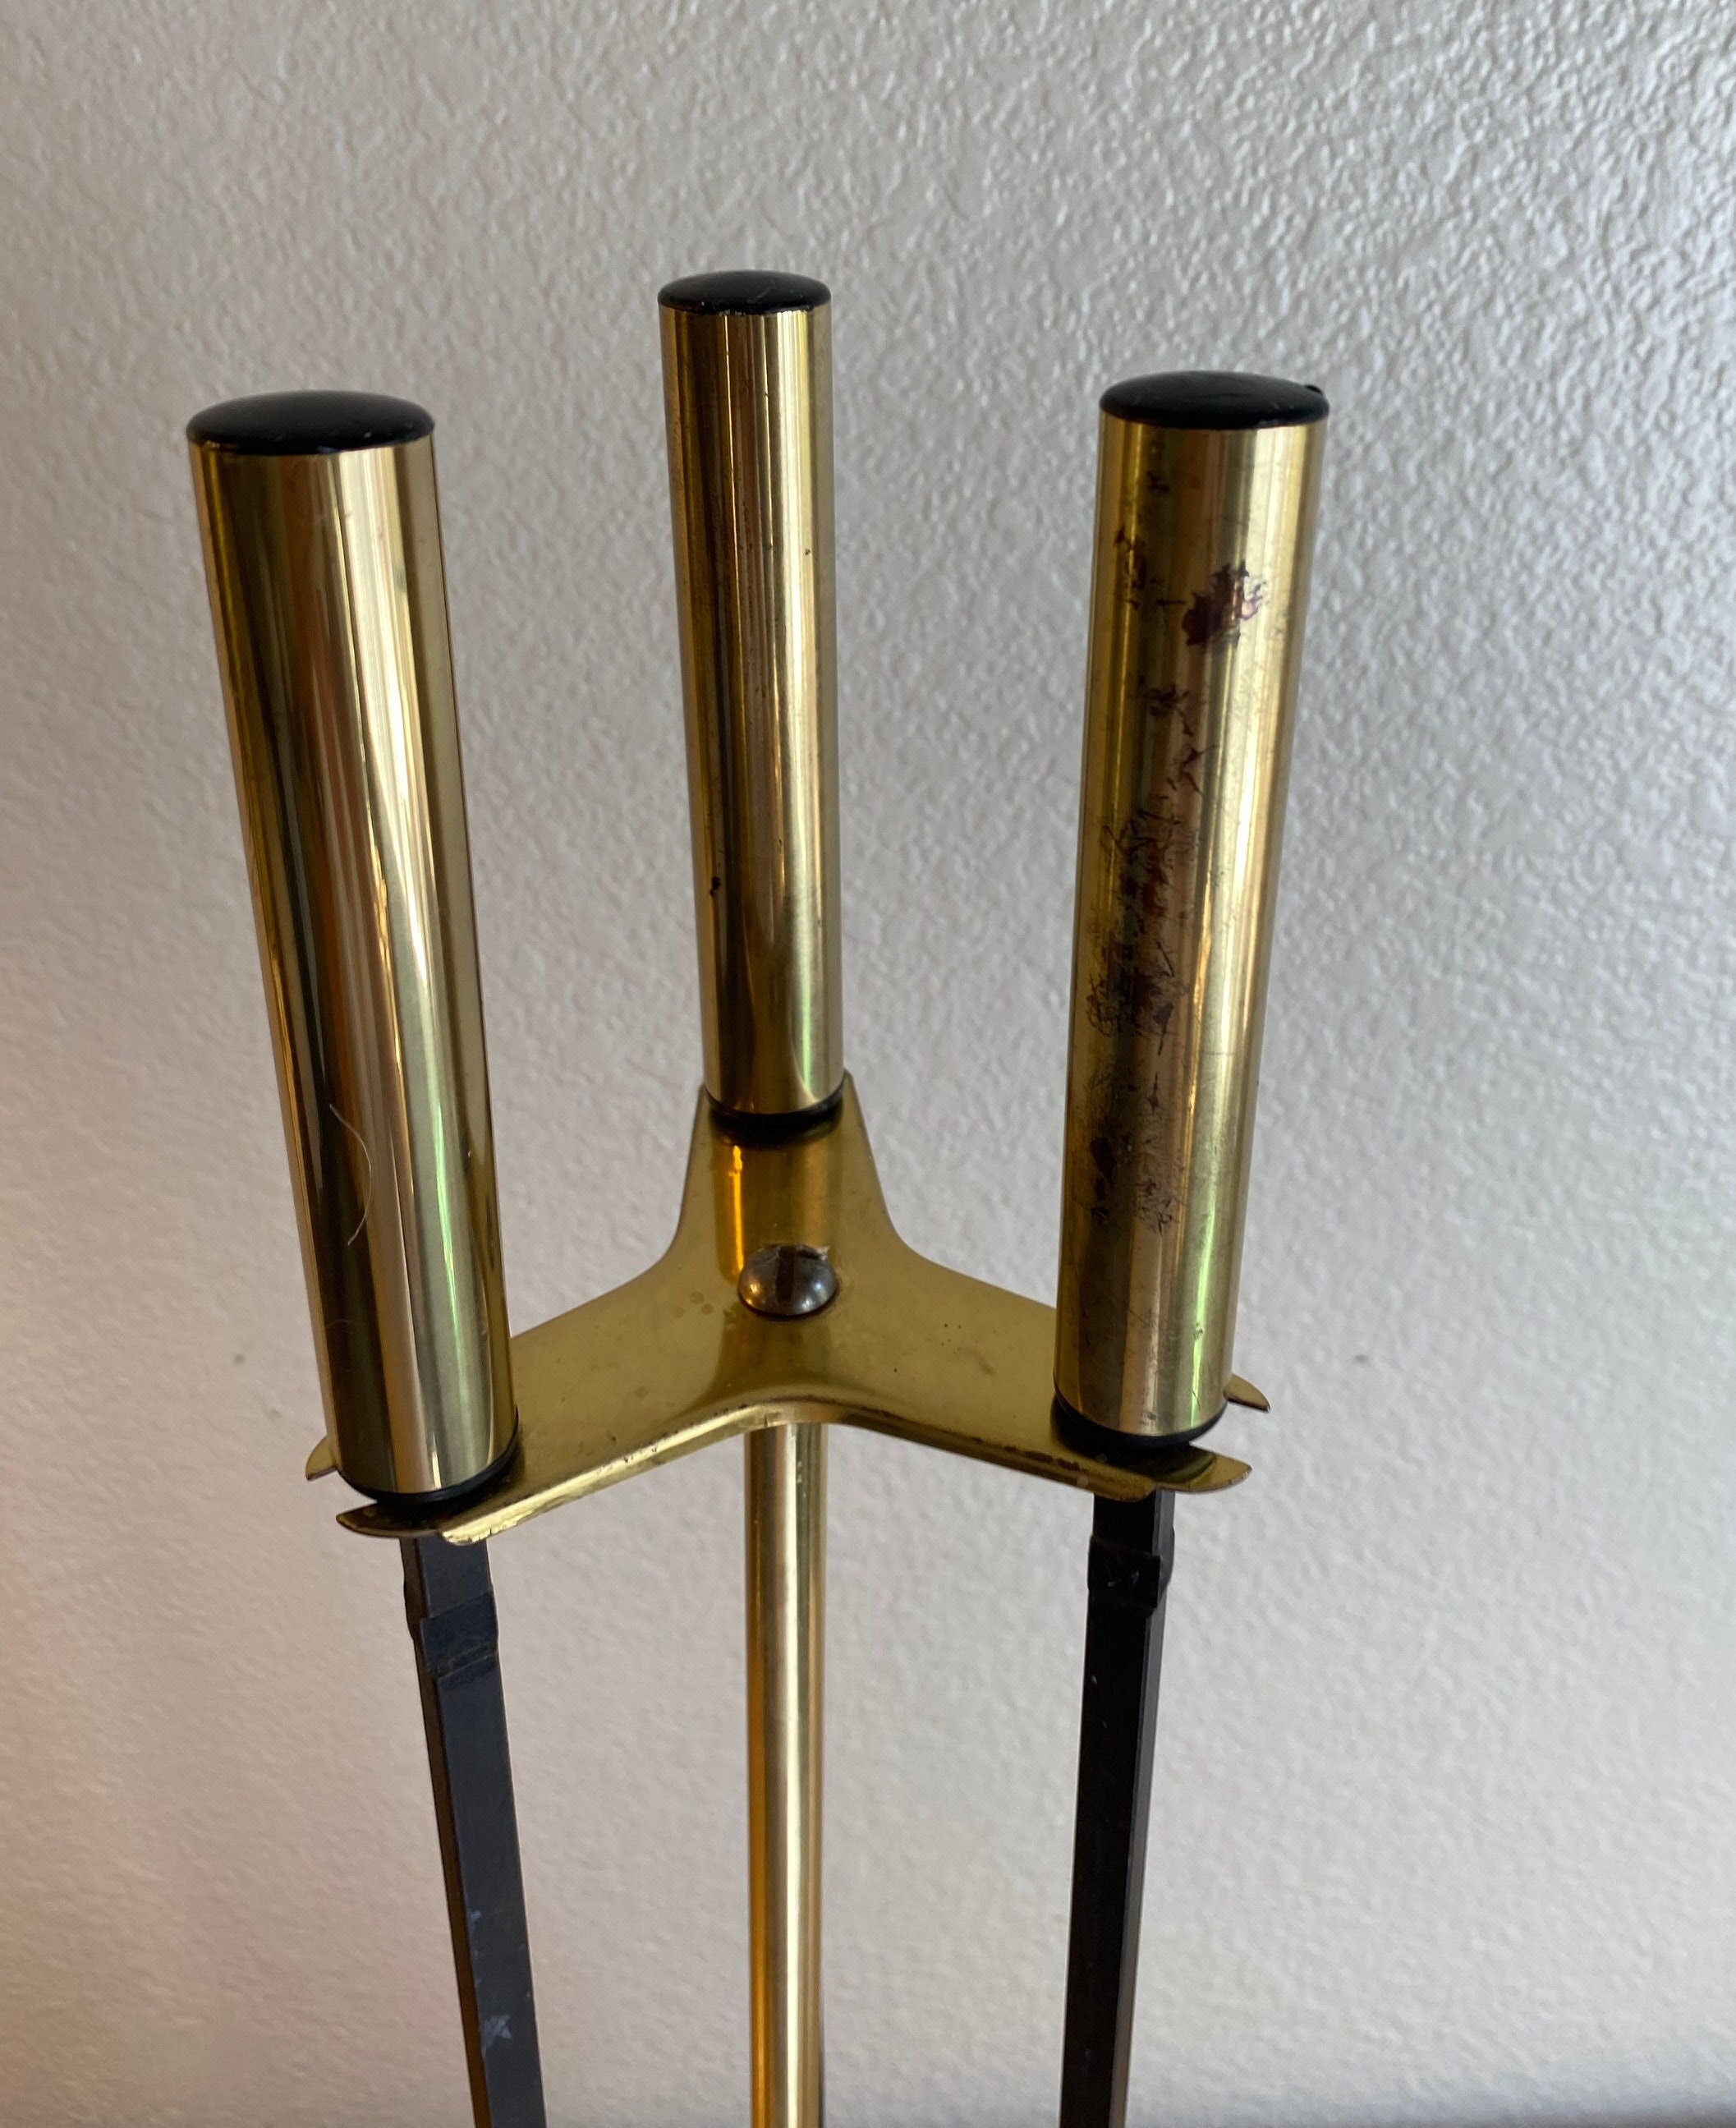 Gucci Horsebit Fireplace Tools, Gold Tone Brass and Silver Chrome, Signed